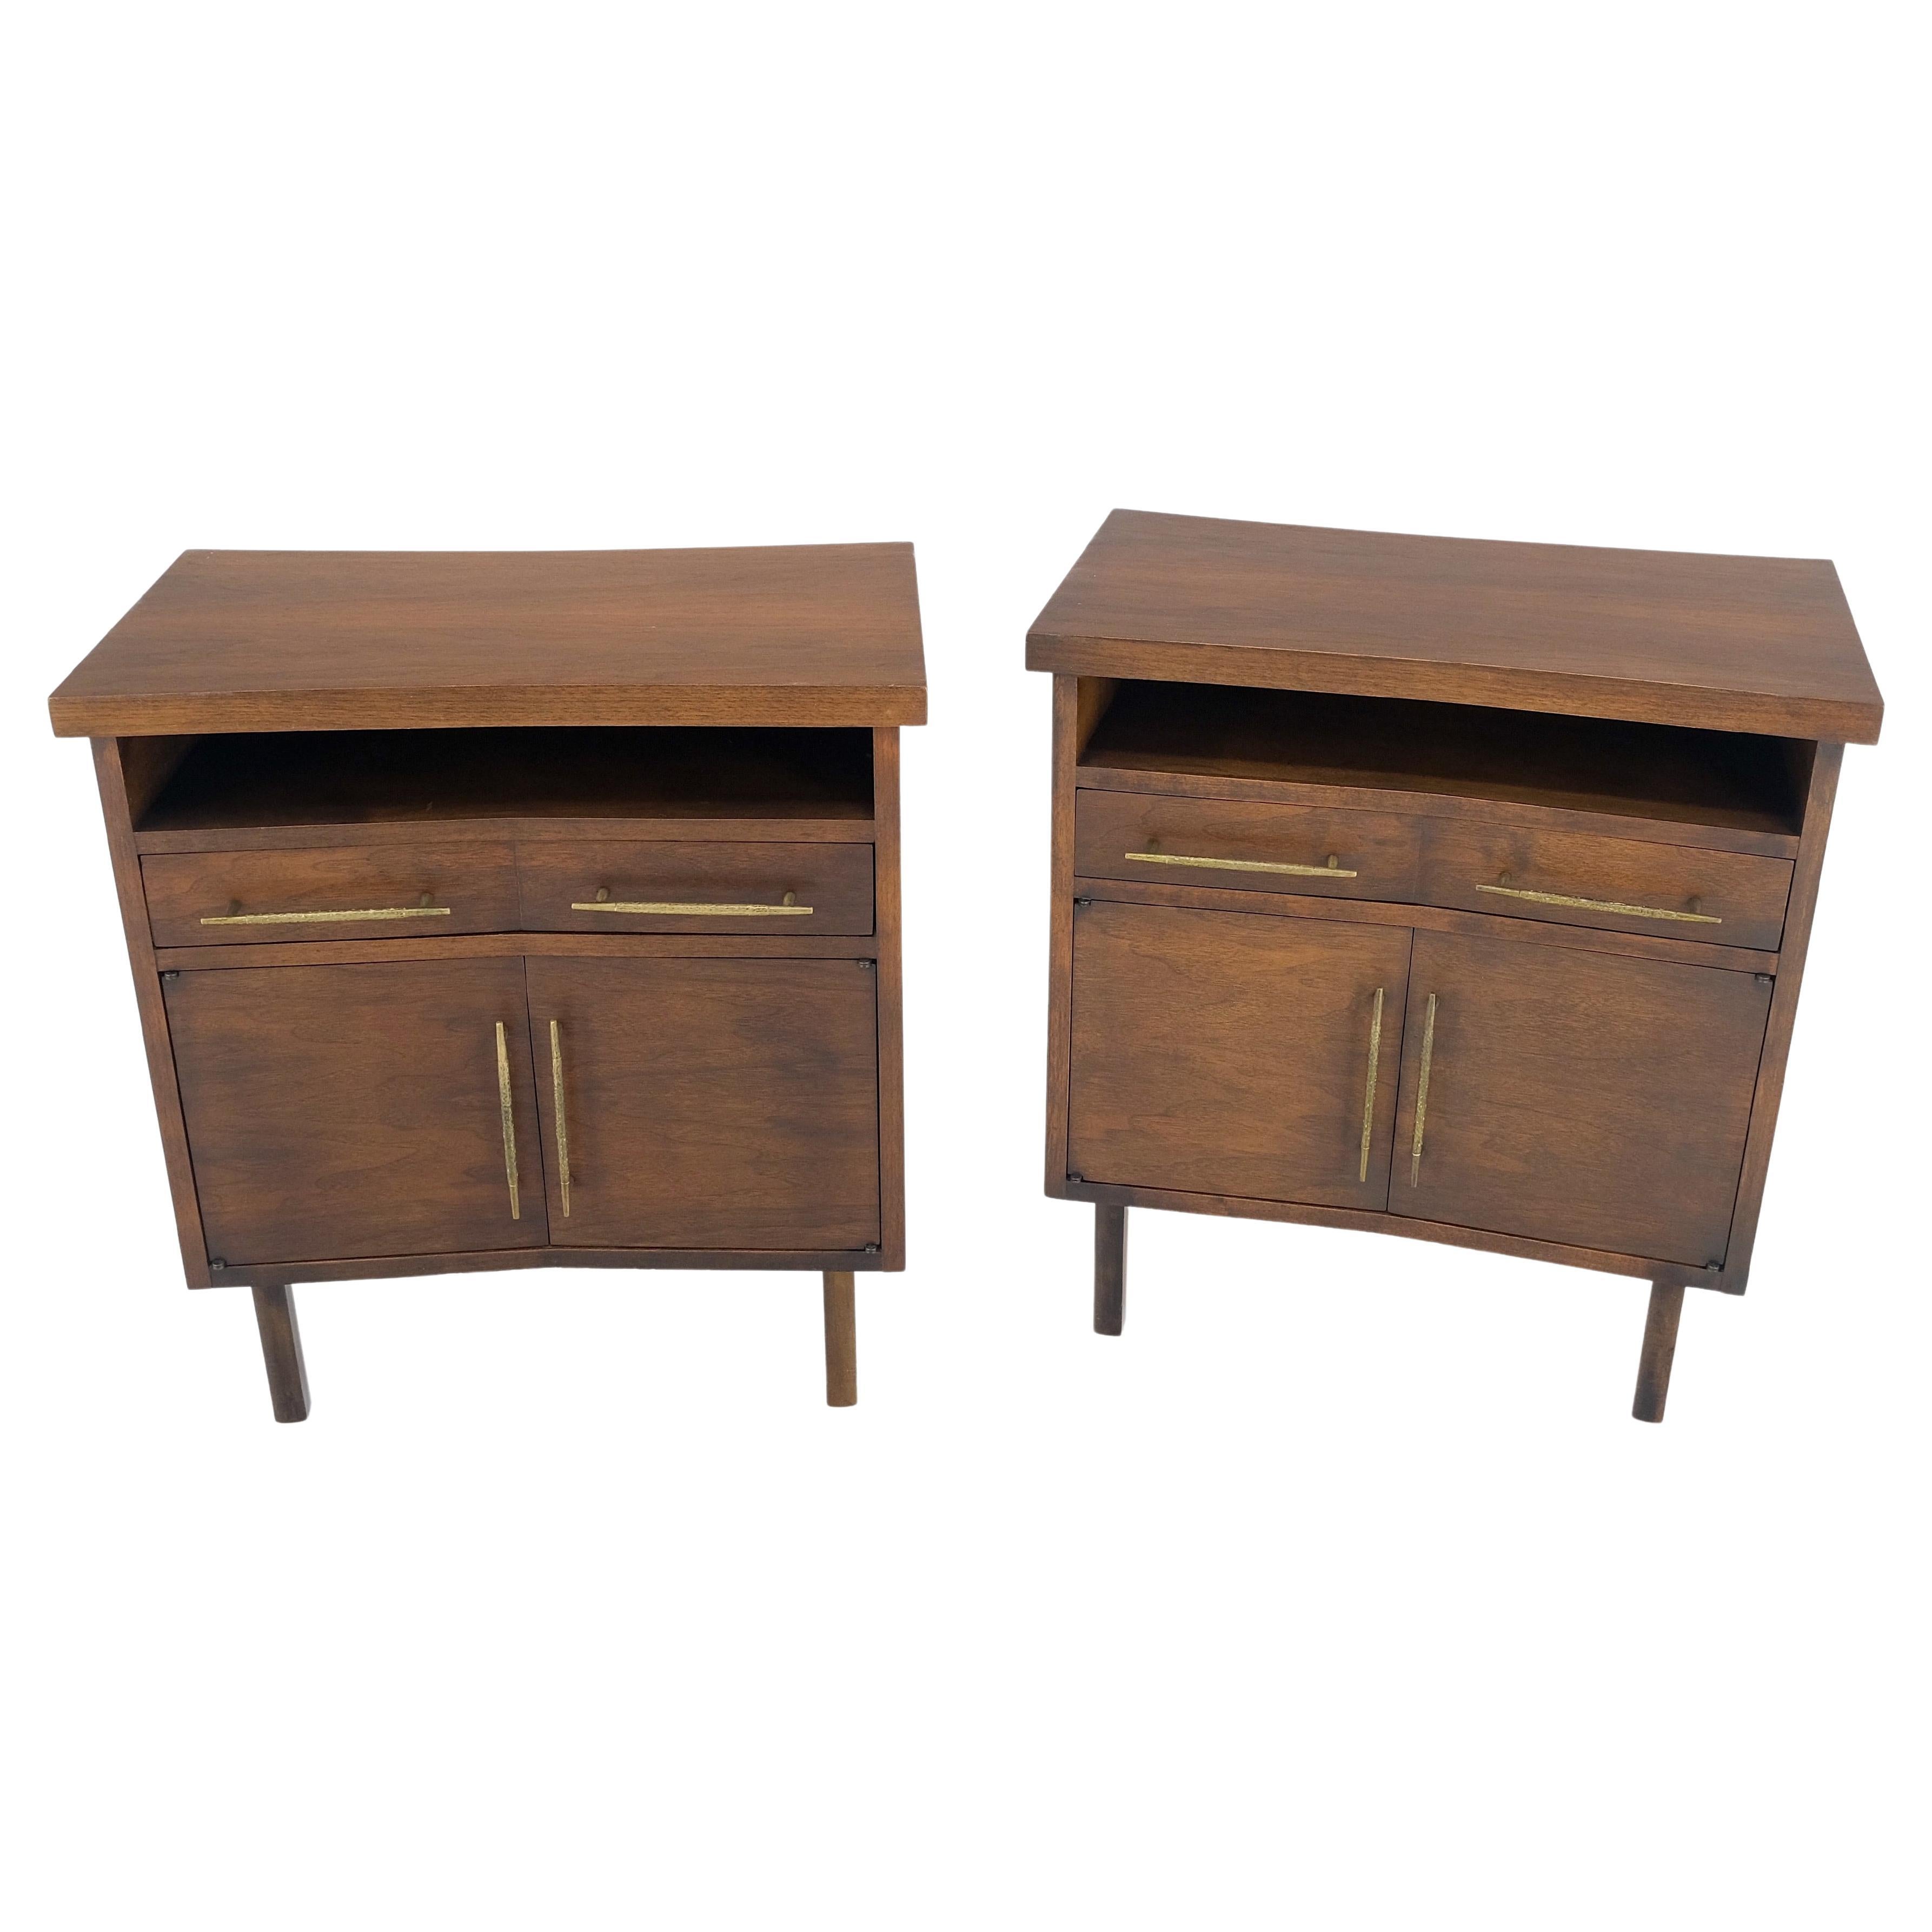 Pair of Walnut Solid Brass Pulls Mid-Century Modern Nightstands Cabinets MINT! For Sale